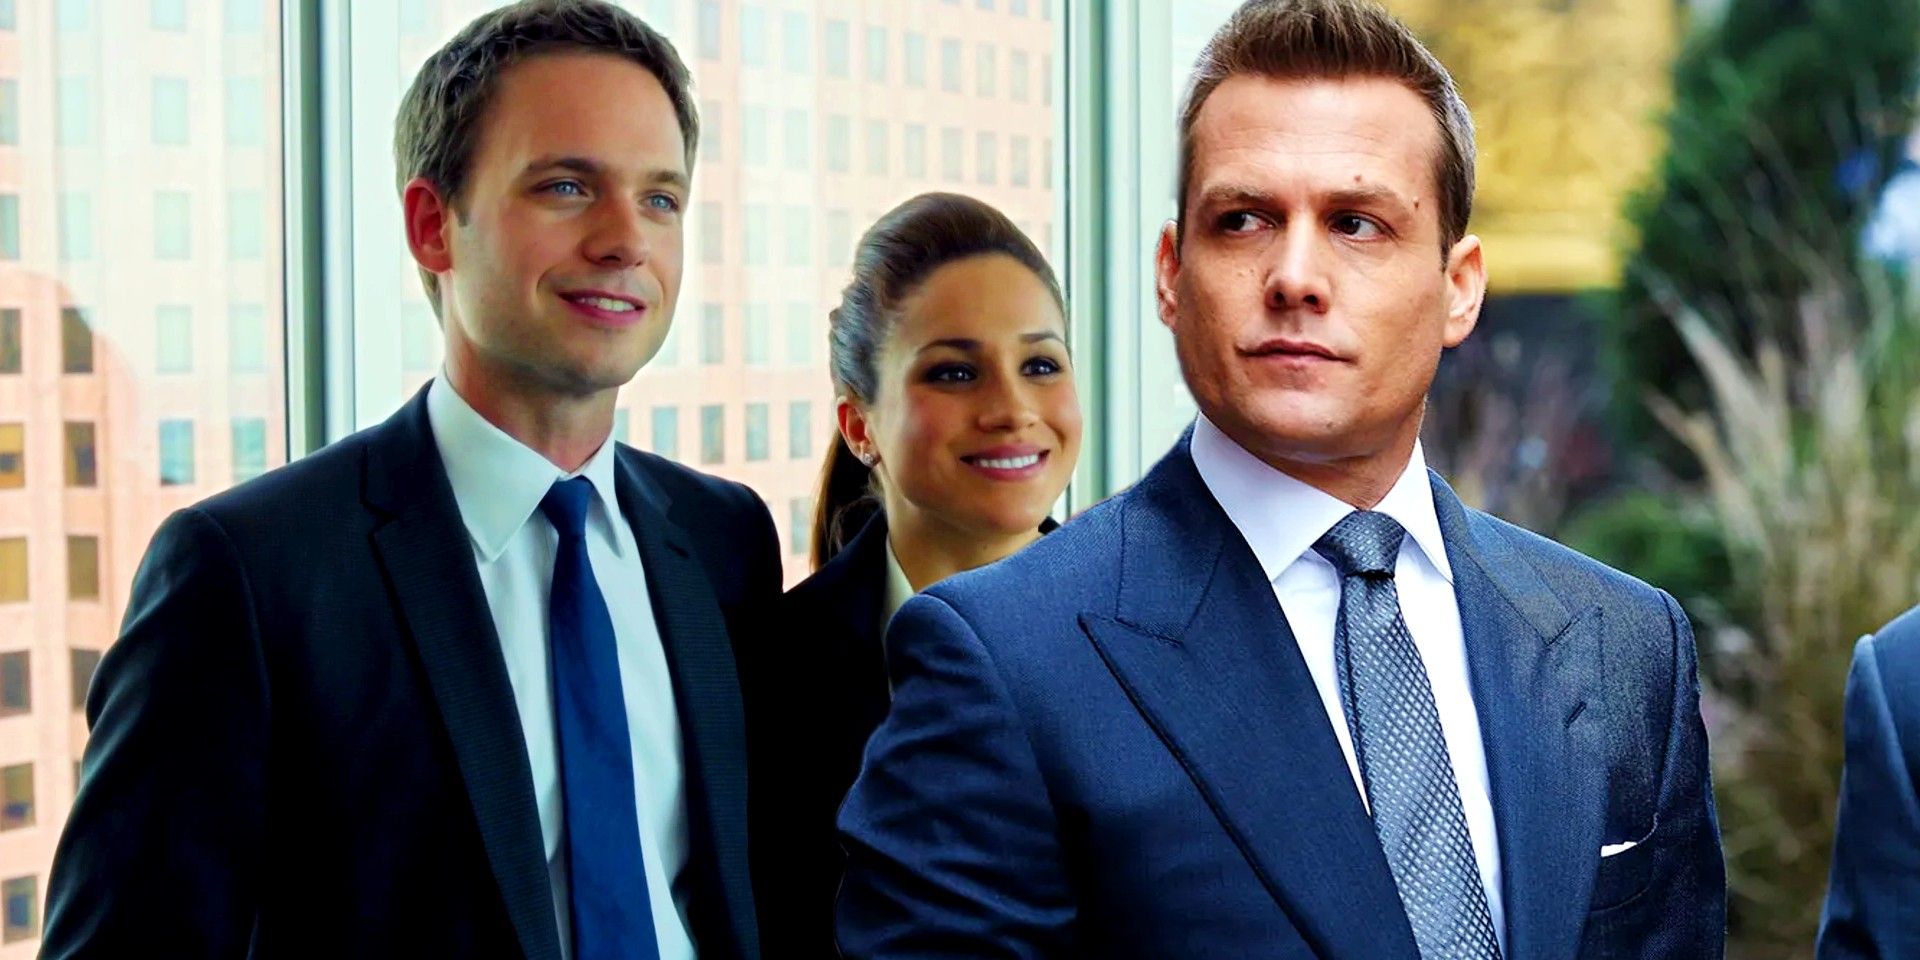 Suits: The Complete Series, Television Series Page